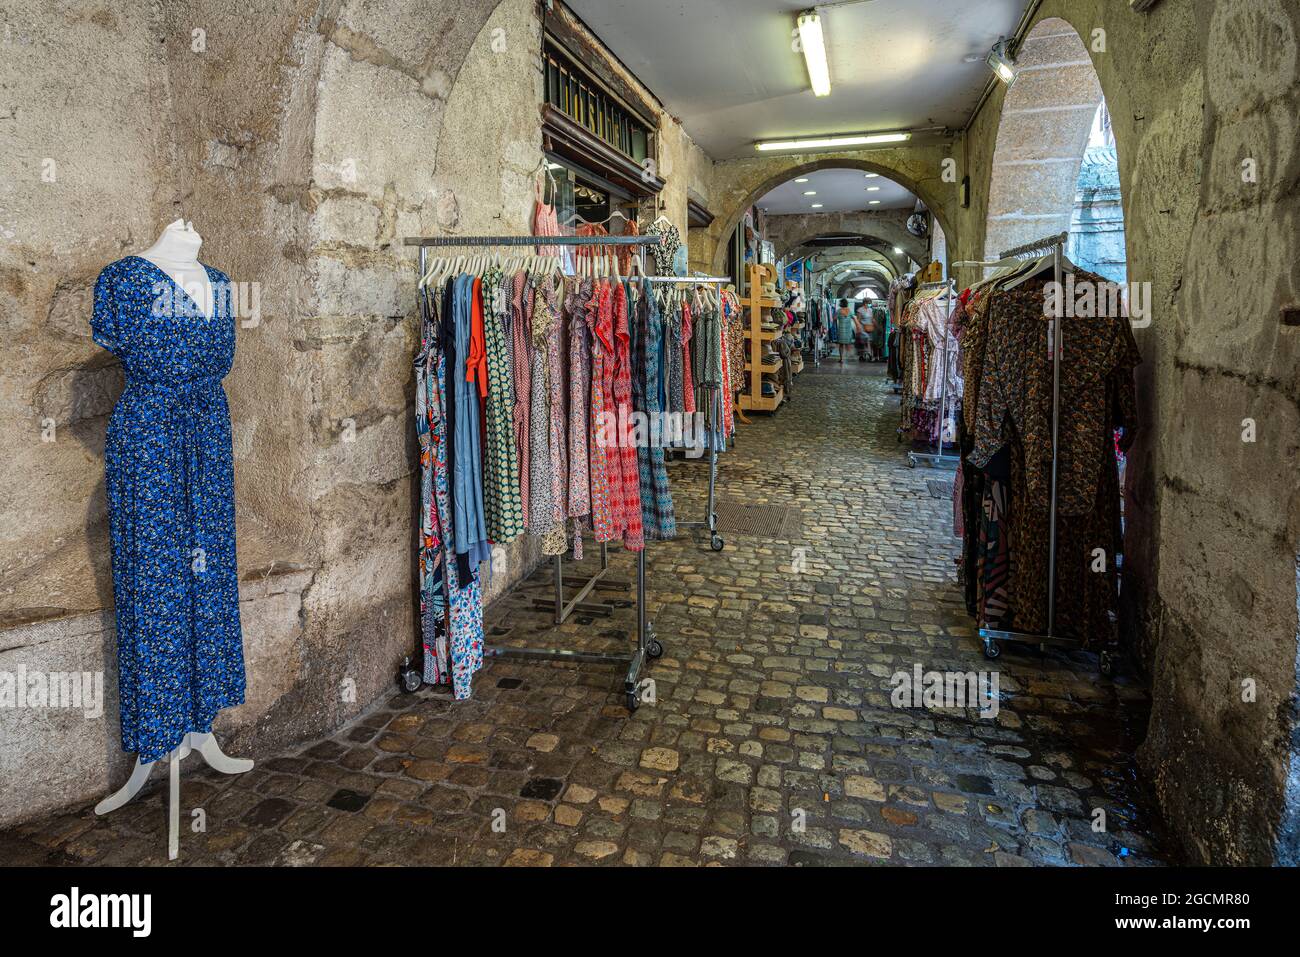 Outdoor clothes shop during the traditional market in the ancient city of Annecy. Annecy, Savoie department, Auvergne-Rhône-Alpes region, France Stock Photo